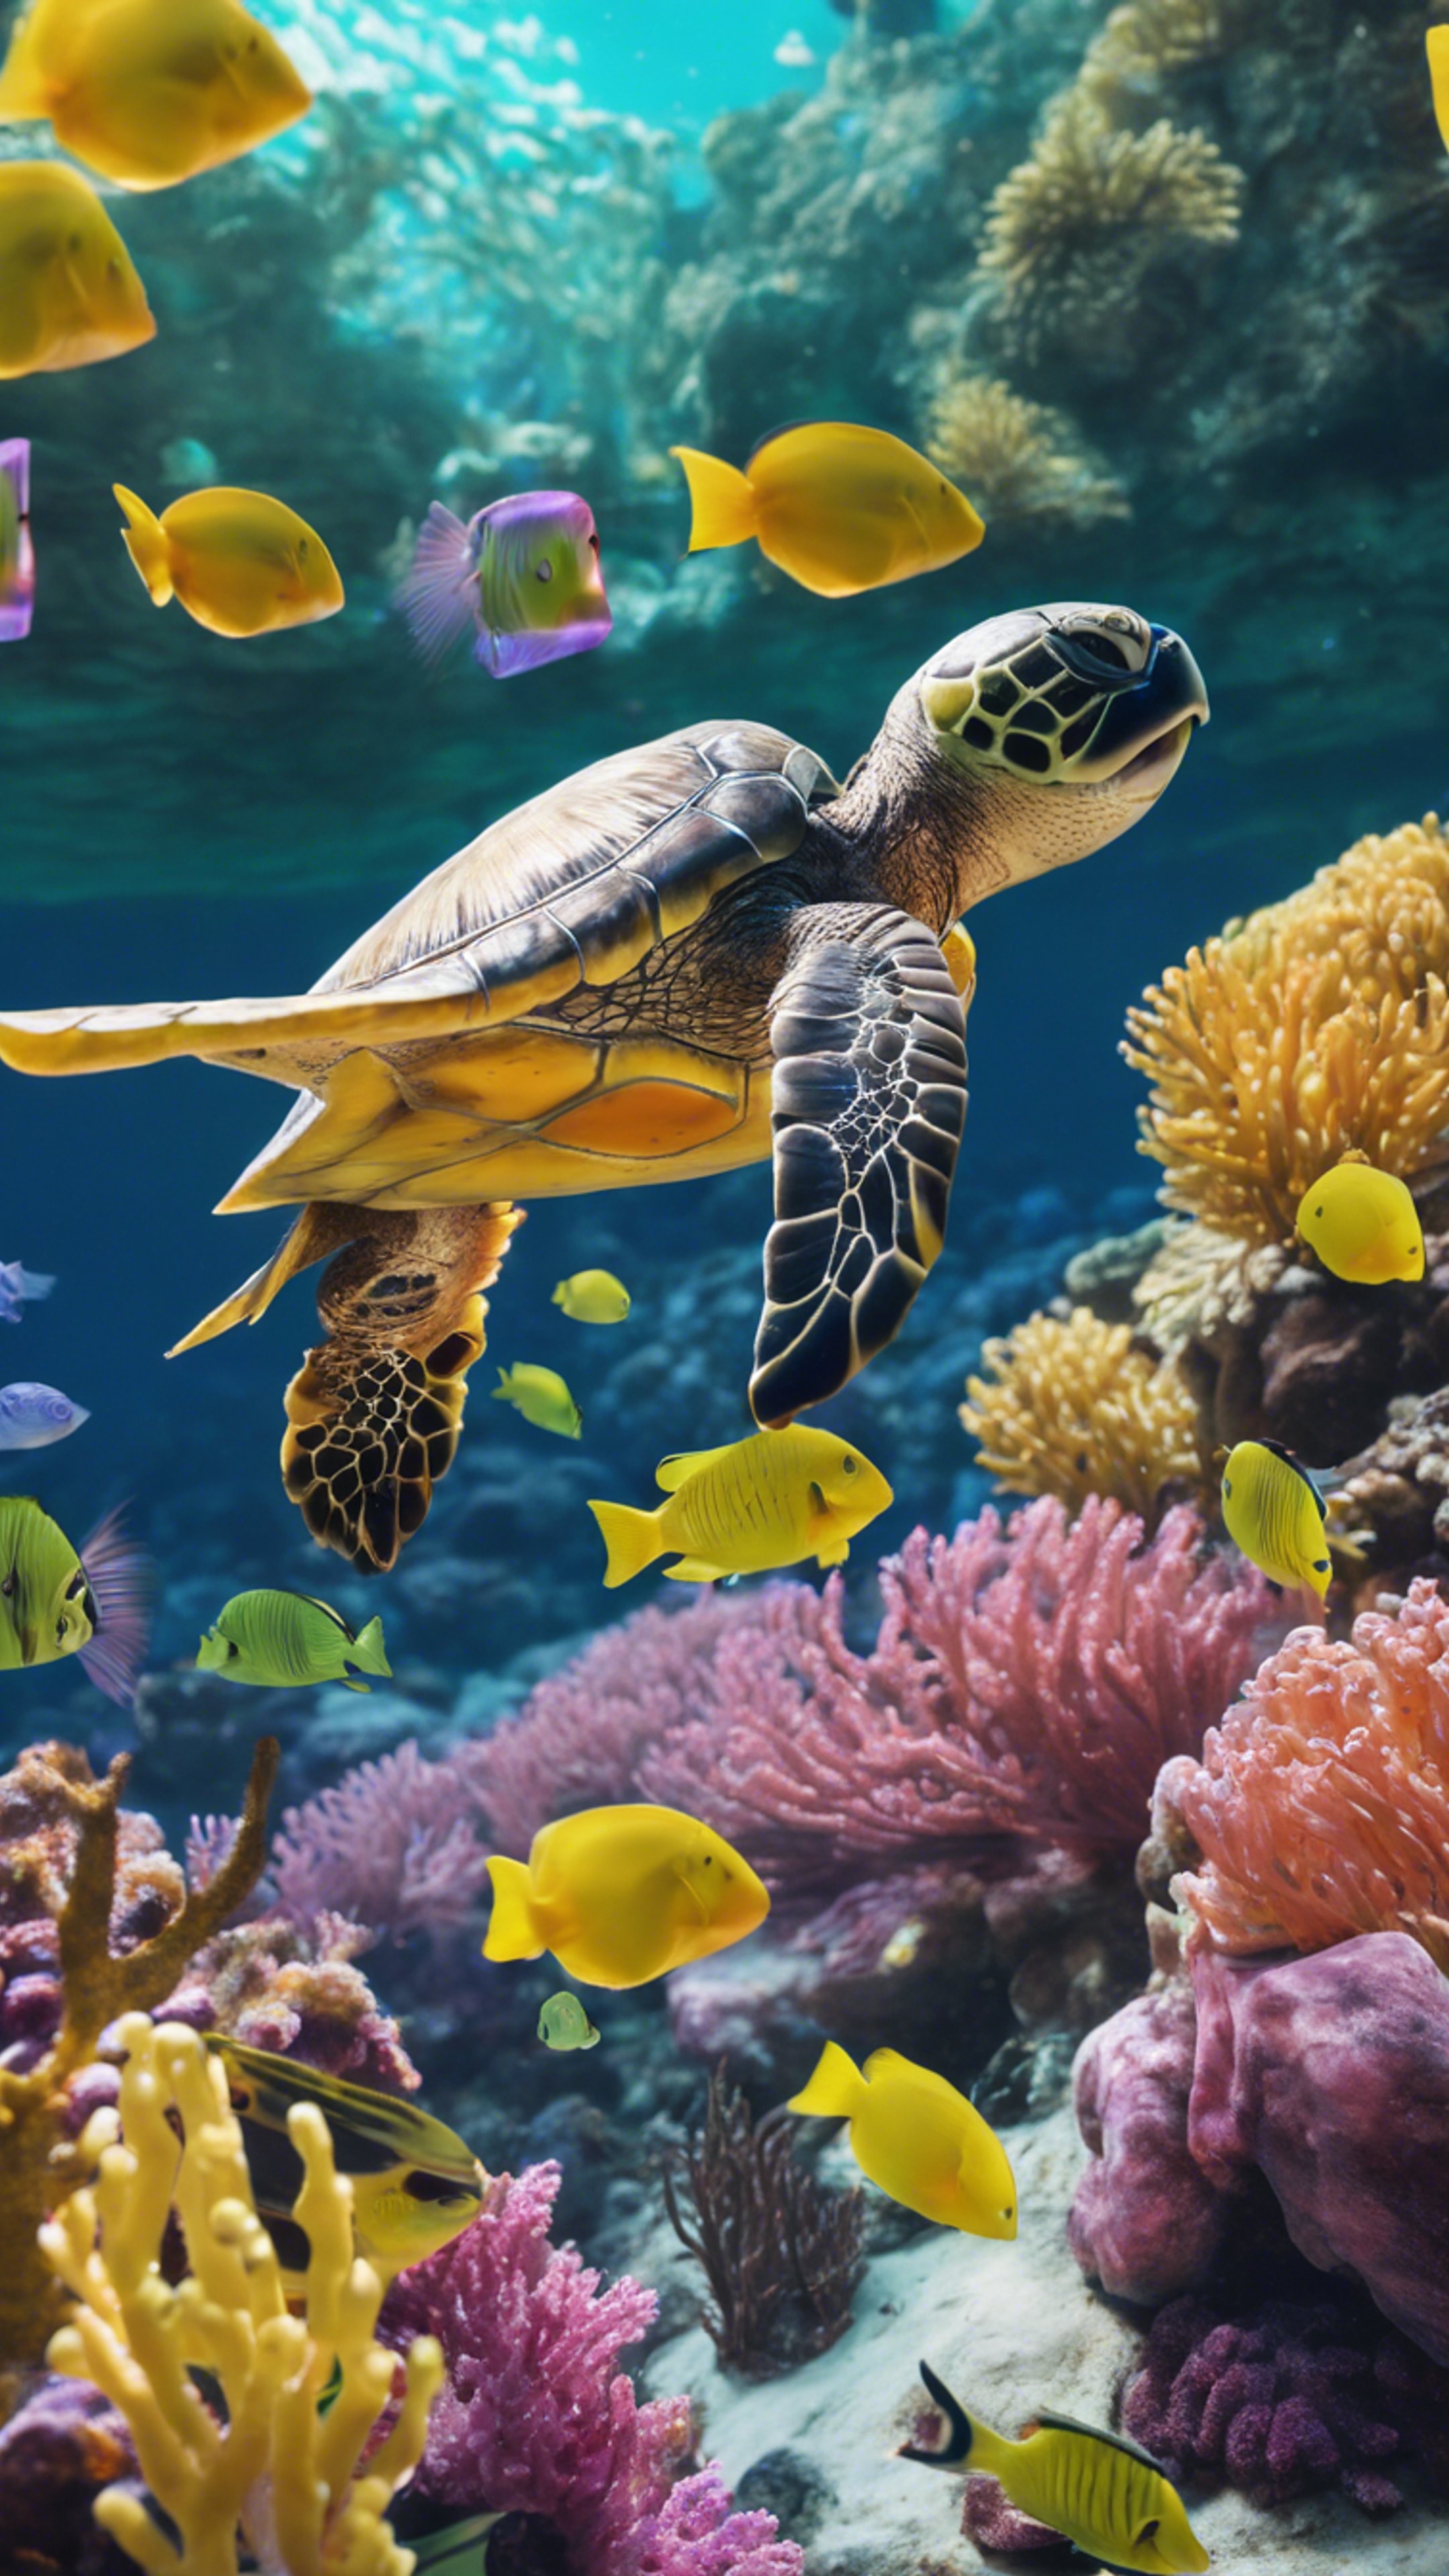 A sea turtle curiously interacting with colorful fishes in a reef. 벽지[2bbd294c31244e90b849]